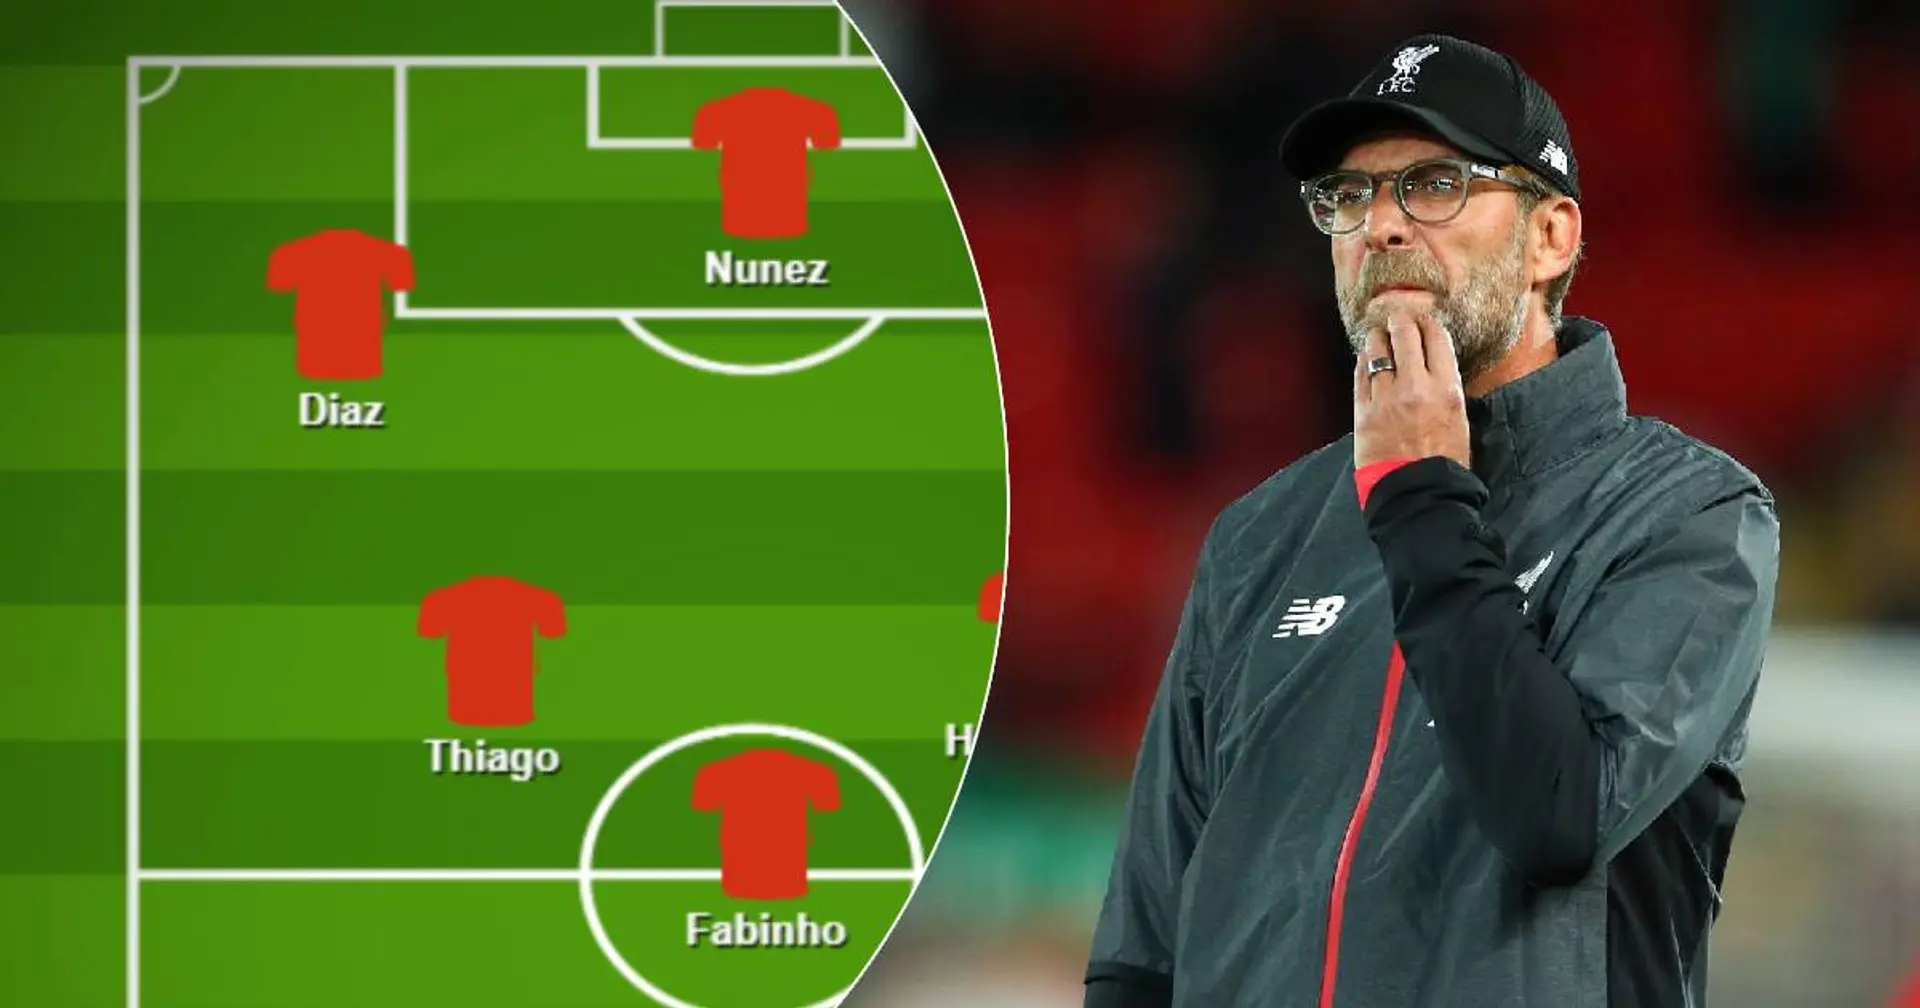 Nunez or Firmino? Select best starting XI for Premier League opener against Fulham